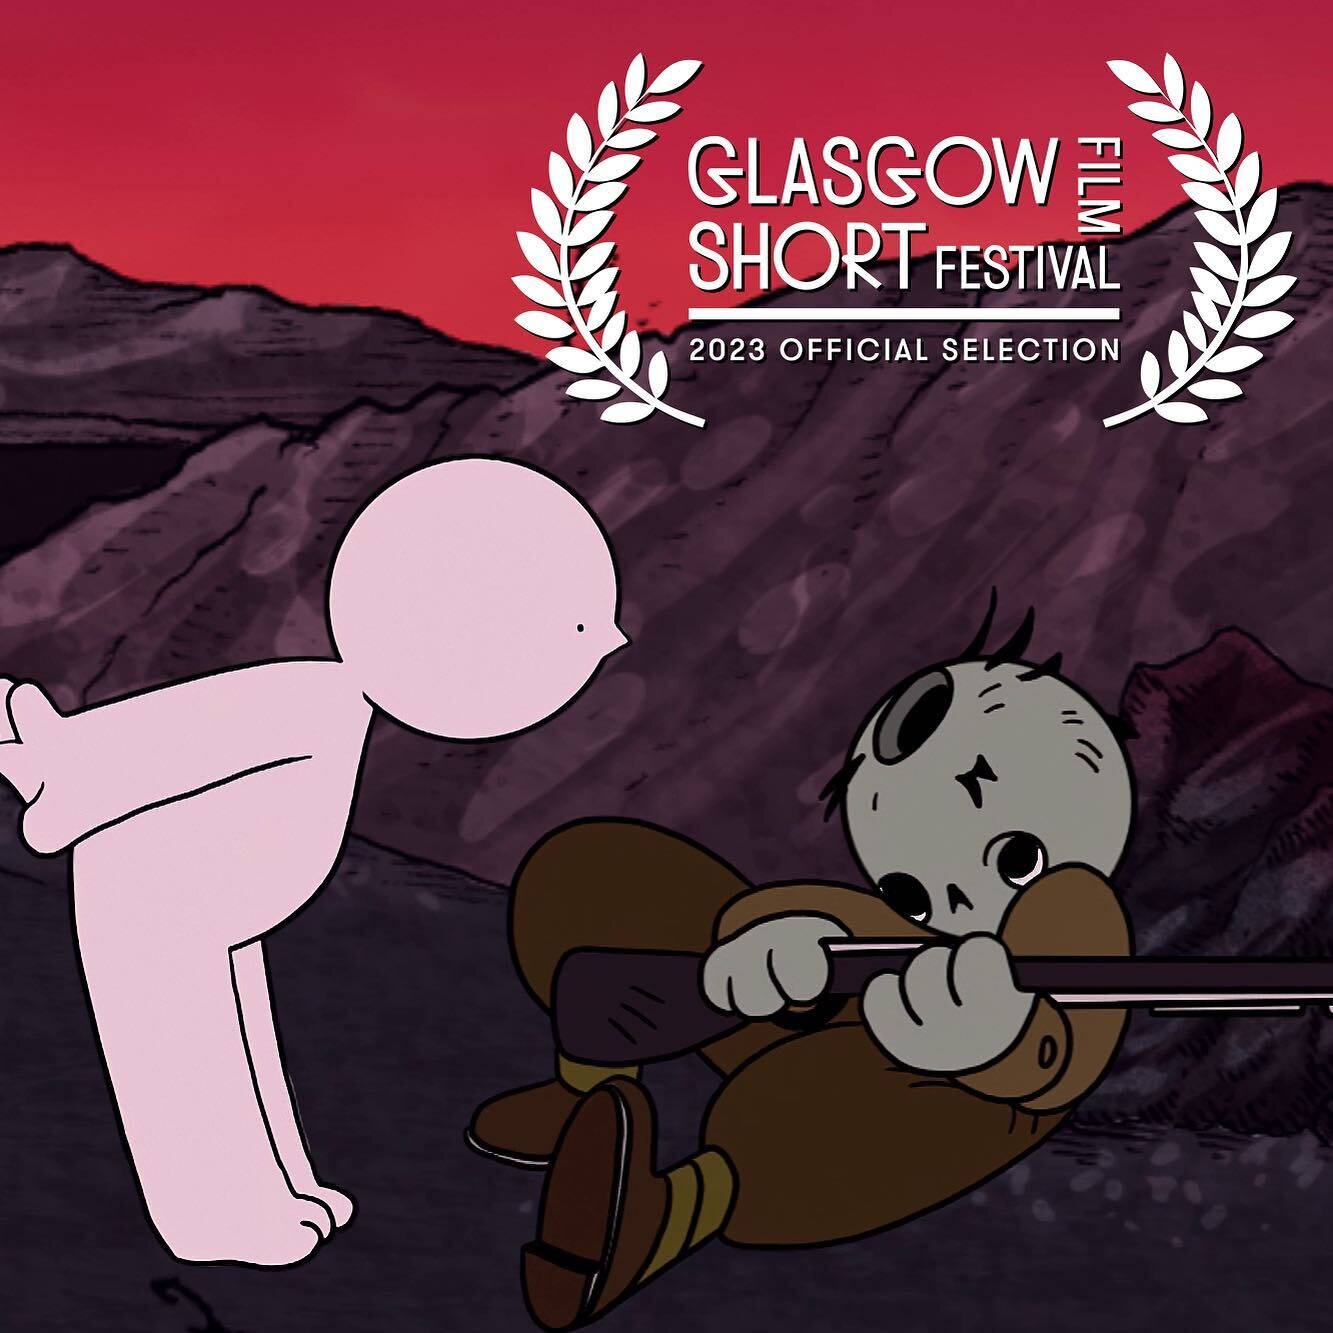 Giddy to announce our little Cuties are headed to Glasgow thanks to @glasgowshort as part of their &lsquo;Welcome to the Multiverse&rsquo; programme: 25th of March 9pm 🏴󠁧󠁢󠁳󠁣󠁴󠁿 
As ever, gassed for team Cutie. Big thanks to the ever mighty @fil